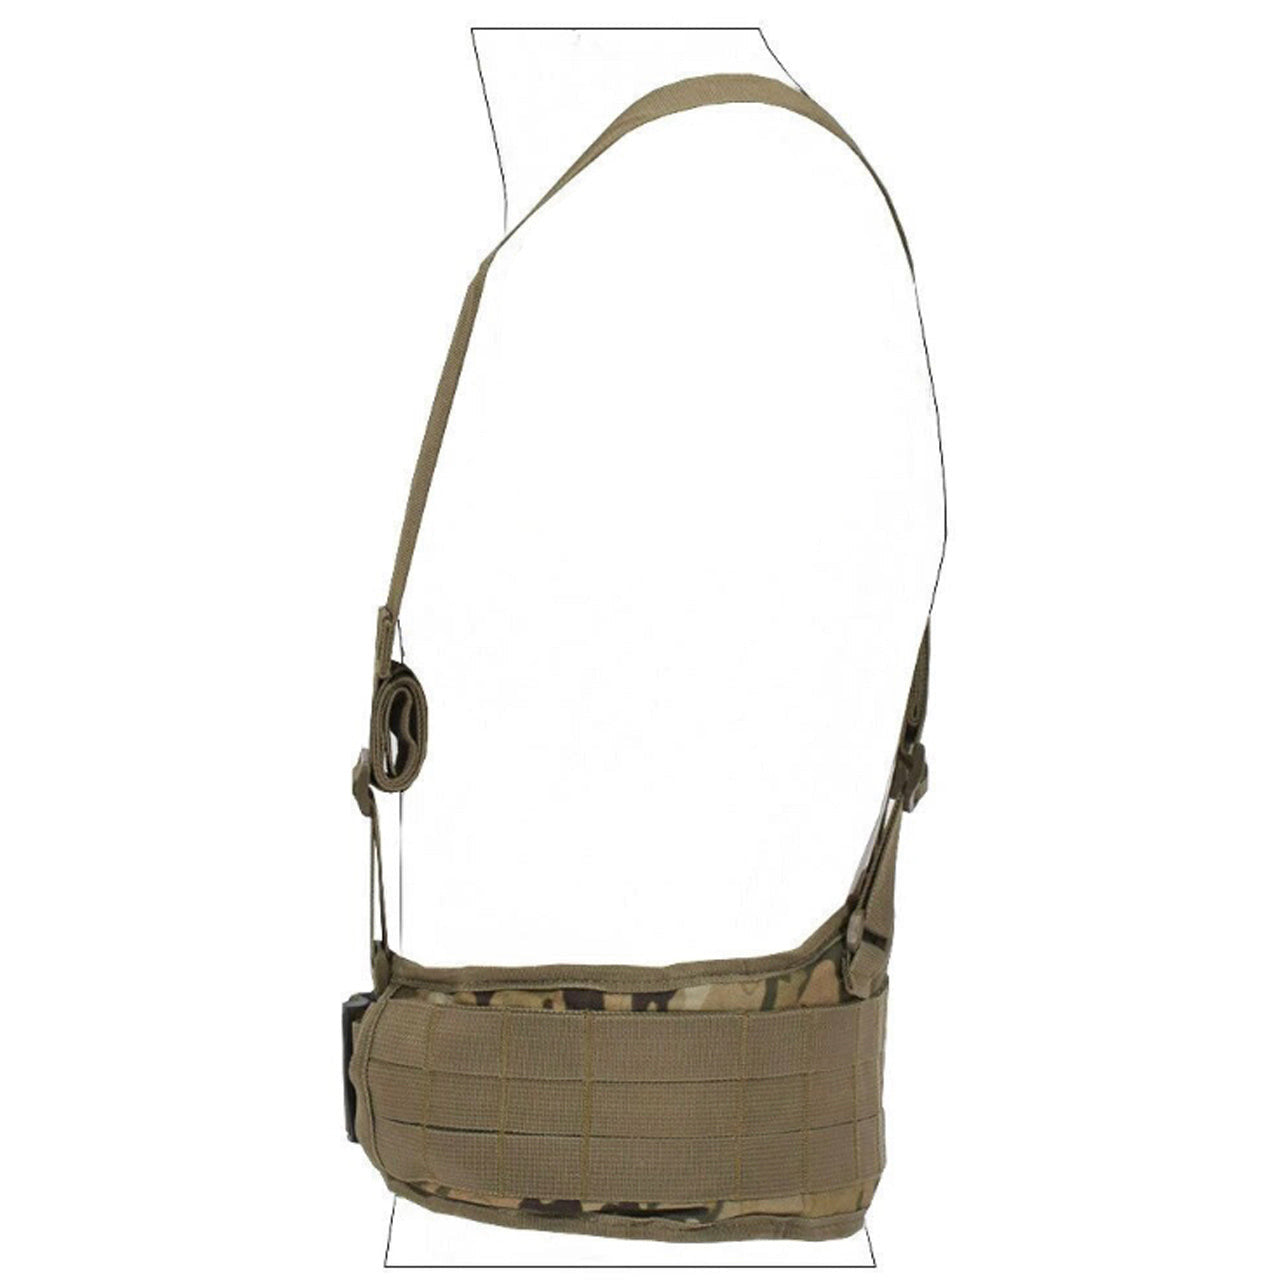 Boasting three rows of MOLLE-designed webbing straps for easy pouch attachment, the Cross Harness Platform is a lightweight, low-profile option with adjustable waist straps (34-64 inches) and easy-release, high-quality buckles. multicam side view www.defenceqstore.com.au